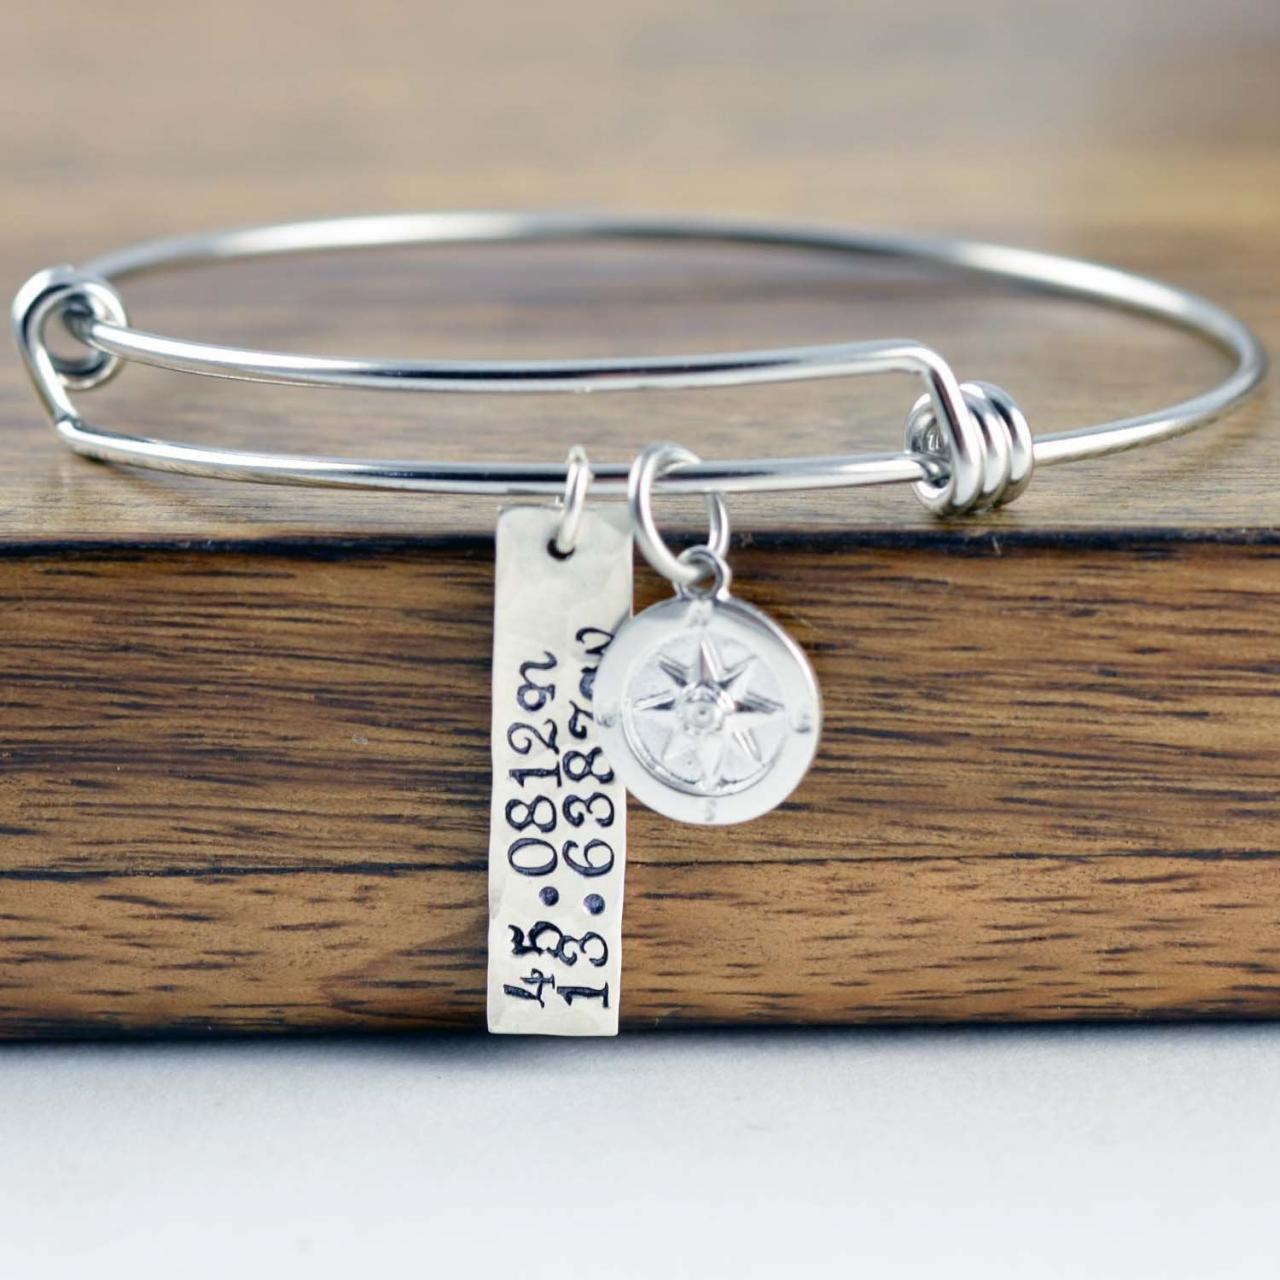 Graduation Day Gift, Class Of 2019, Gifts For Her 2019, Graduation Gifts For Her, Personalized Graduation Gifts, Coordinate Bracelet